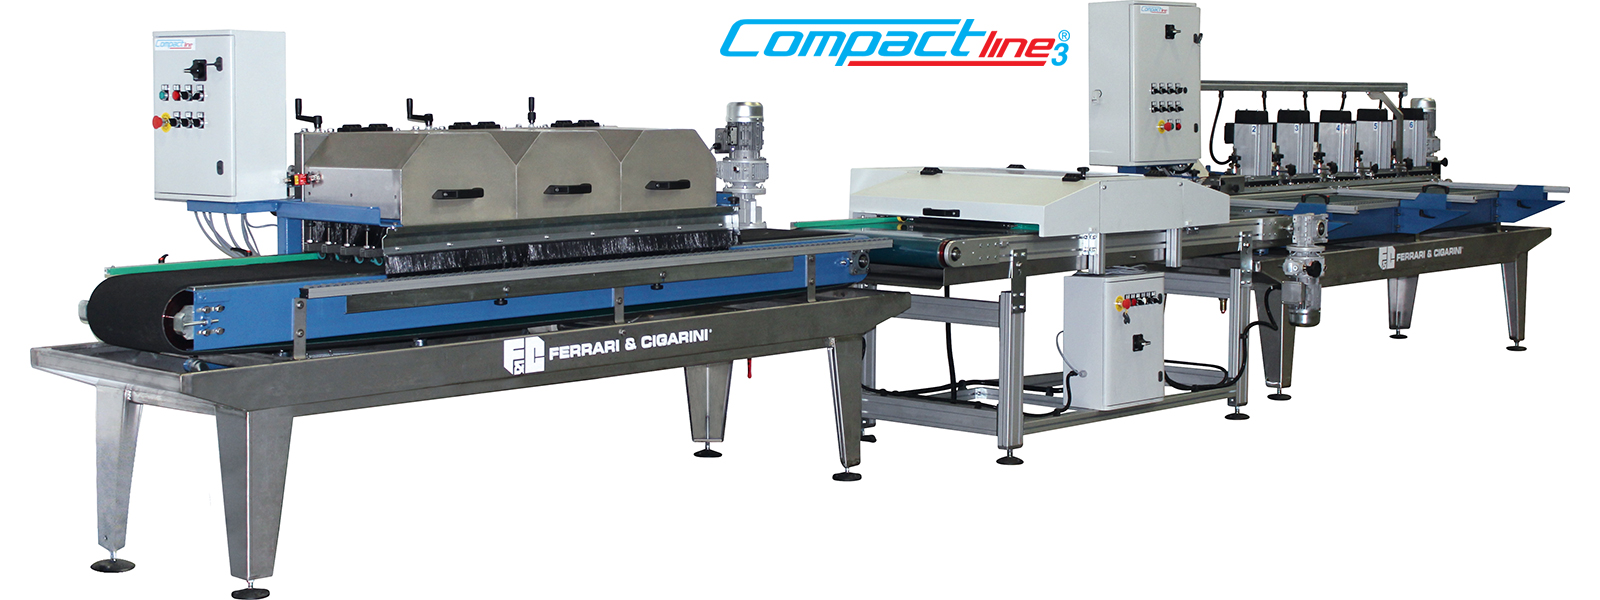 COMPACT LINE 3 - AUTOMATIC CUTTING AND  EDGE-PROFILING LINE FOR CERAMIC, MARBLE AND STONE